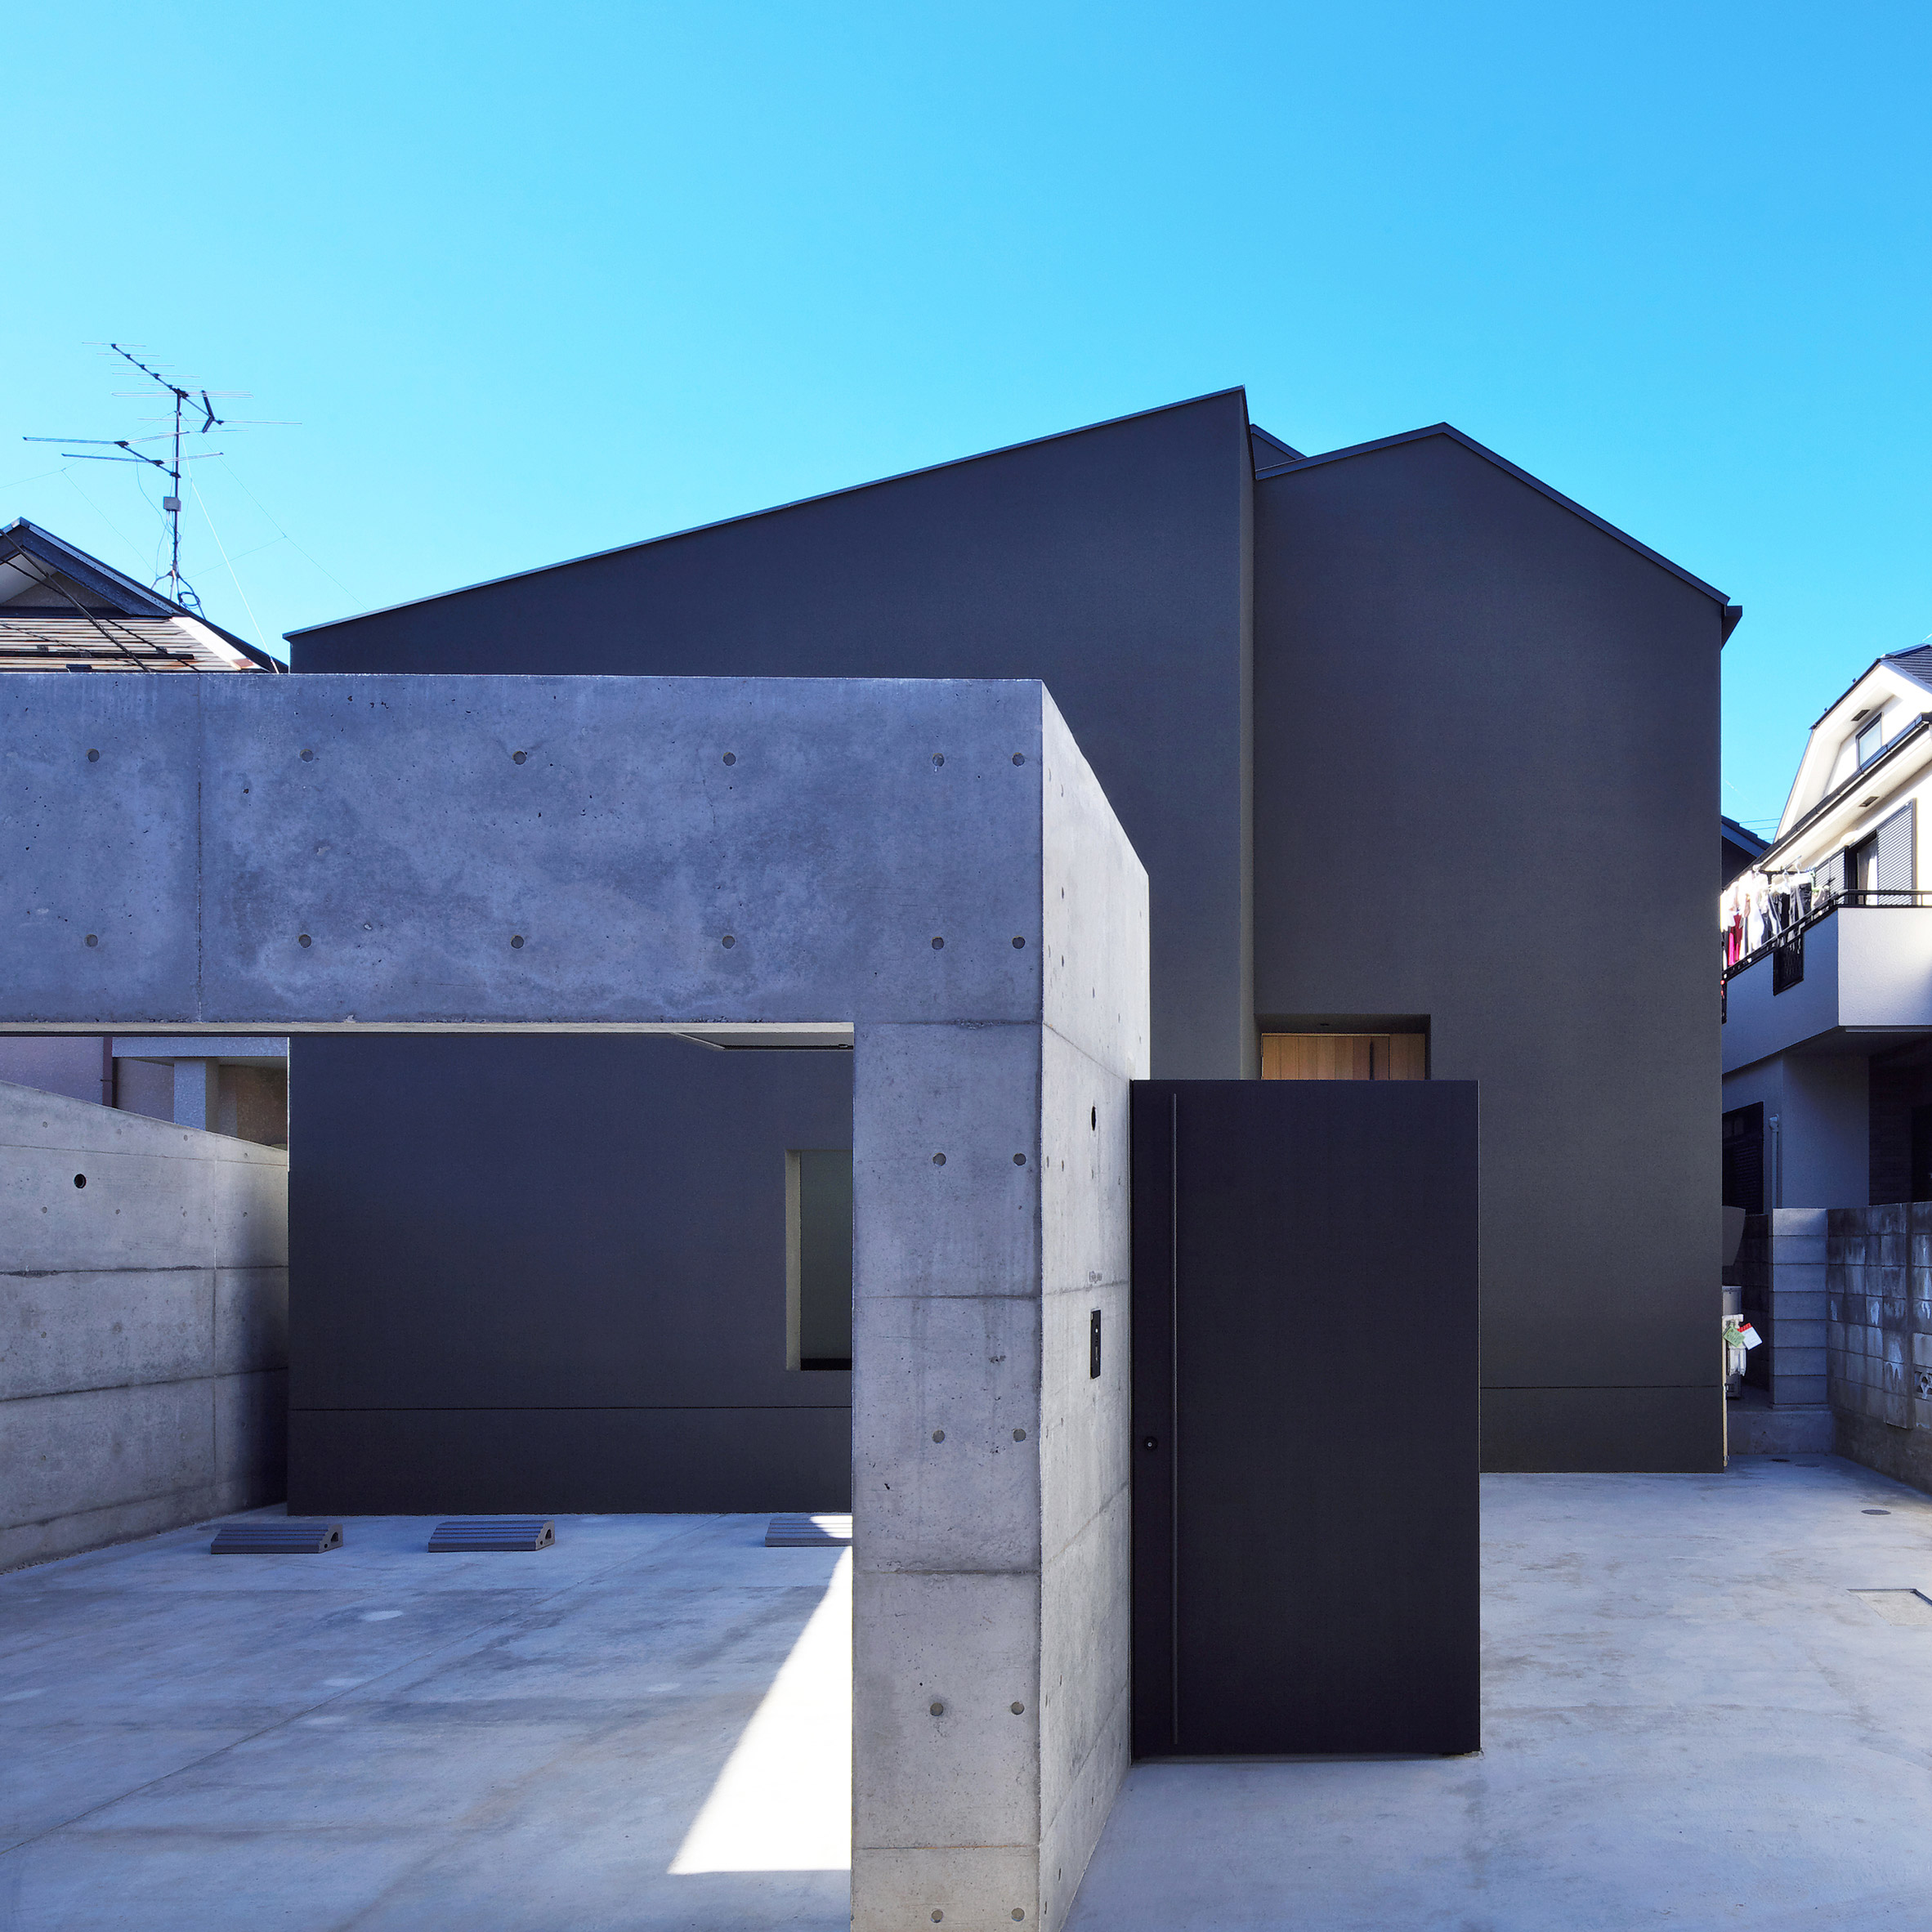 house-of-fluctuations-satoru-hirota-architects-architecture-tokyo-japan-residential_dezeen_2364_col_19